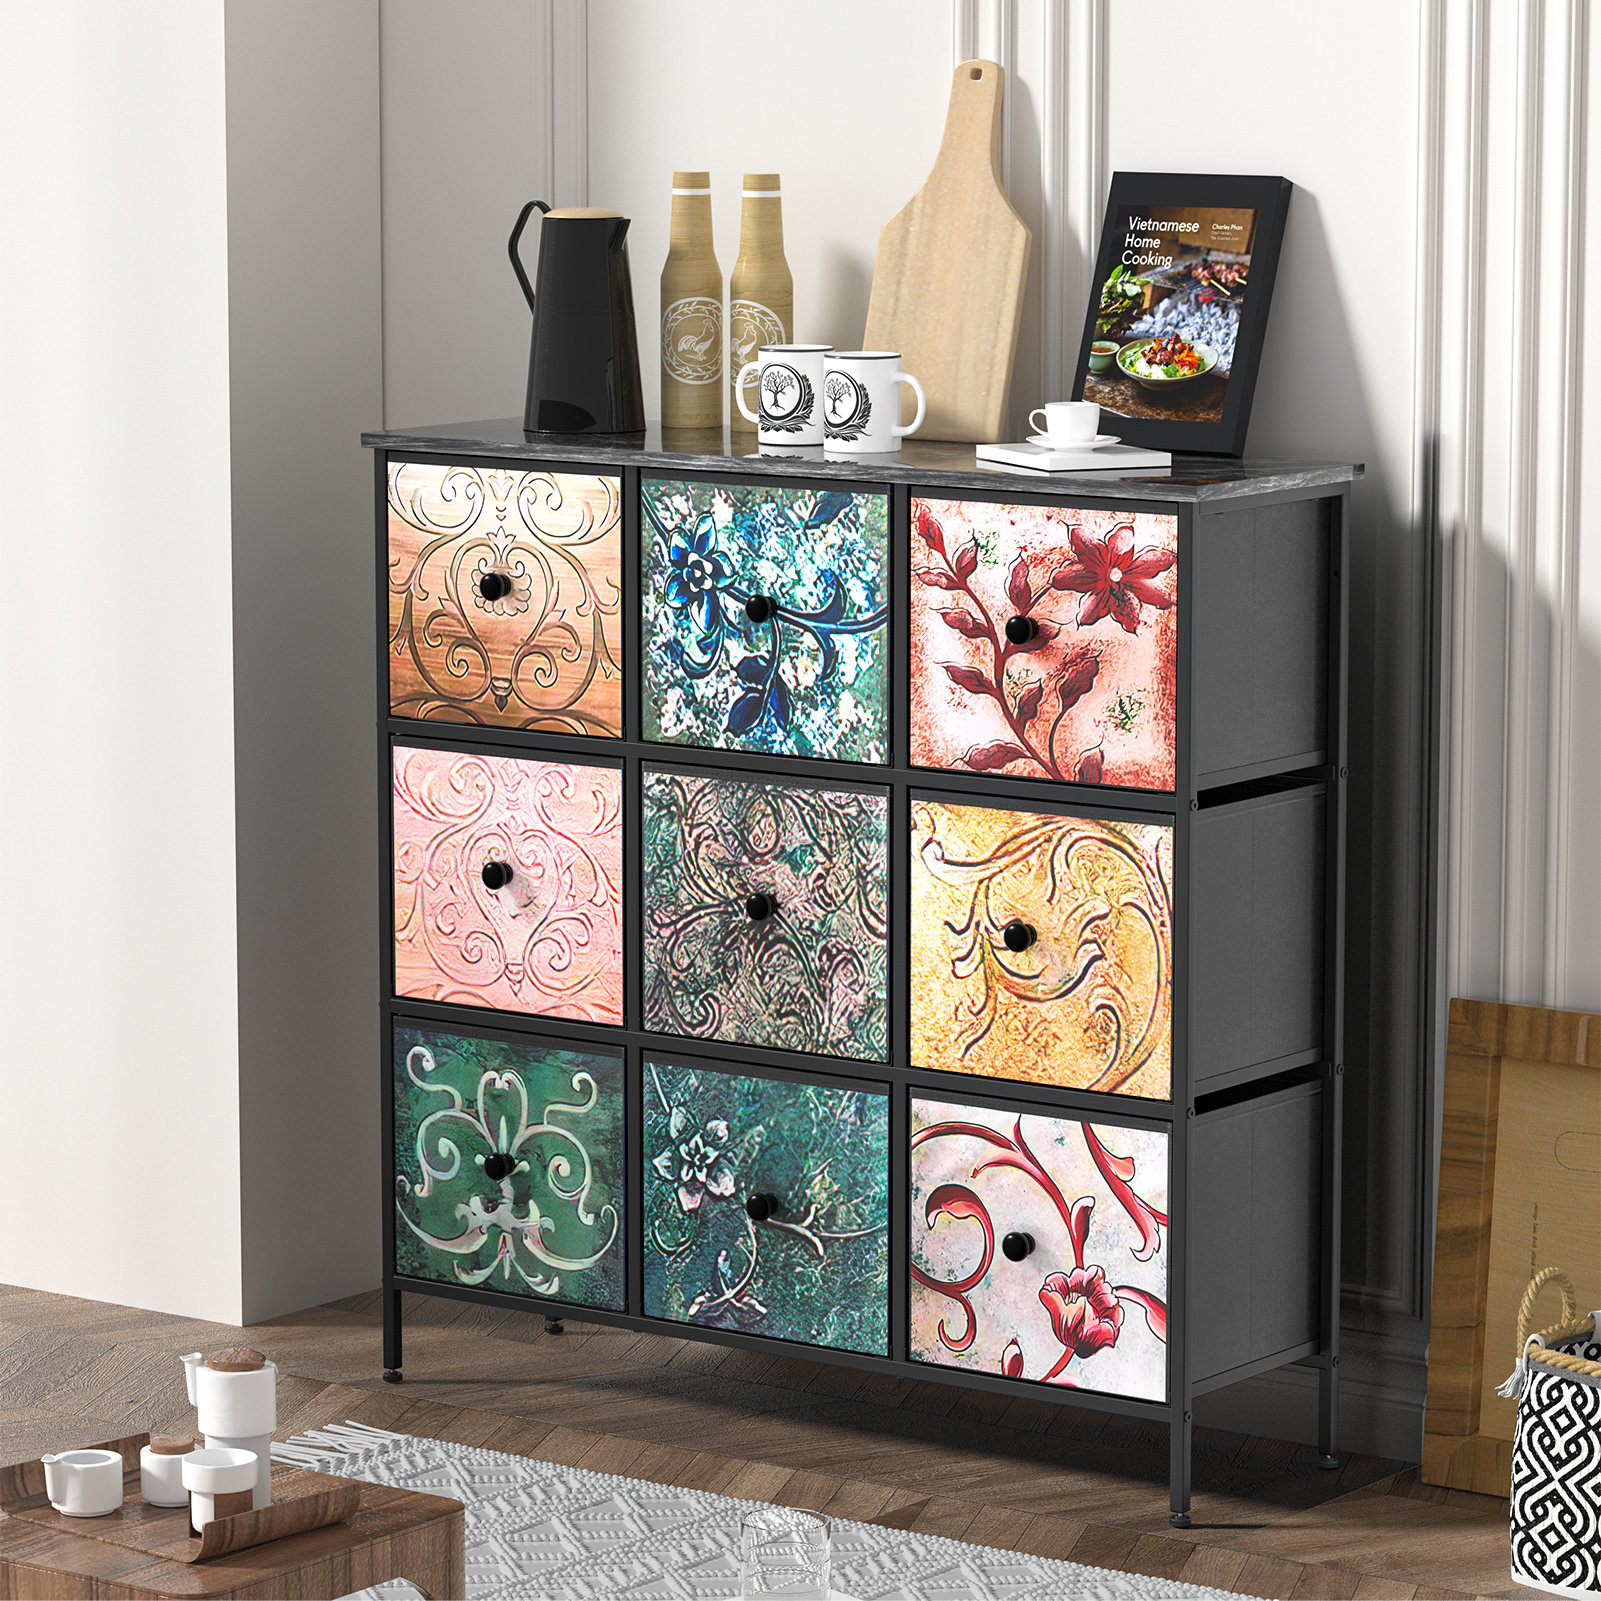 9 Compartment Drawer Organizer Fabric Storage Tower for Bedroom